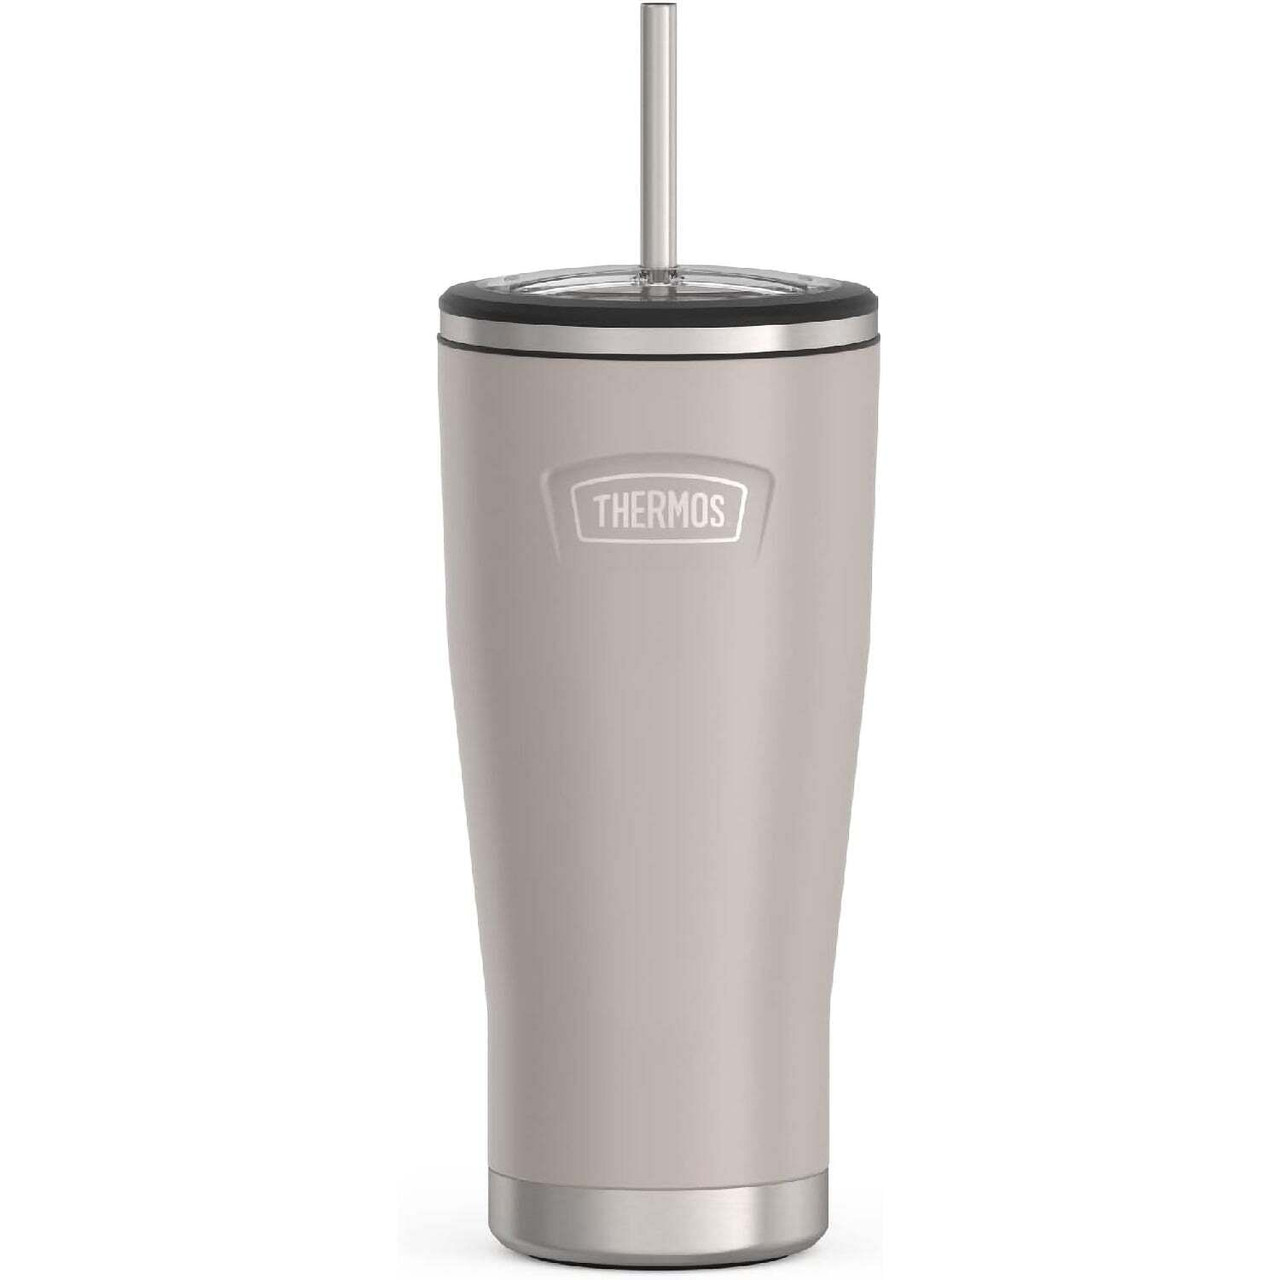 ICON Series by THERMOS Stainless Steel Cold Tumbler with Straw, 24 Ounce, Sandstone